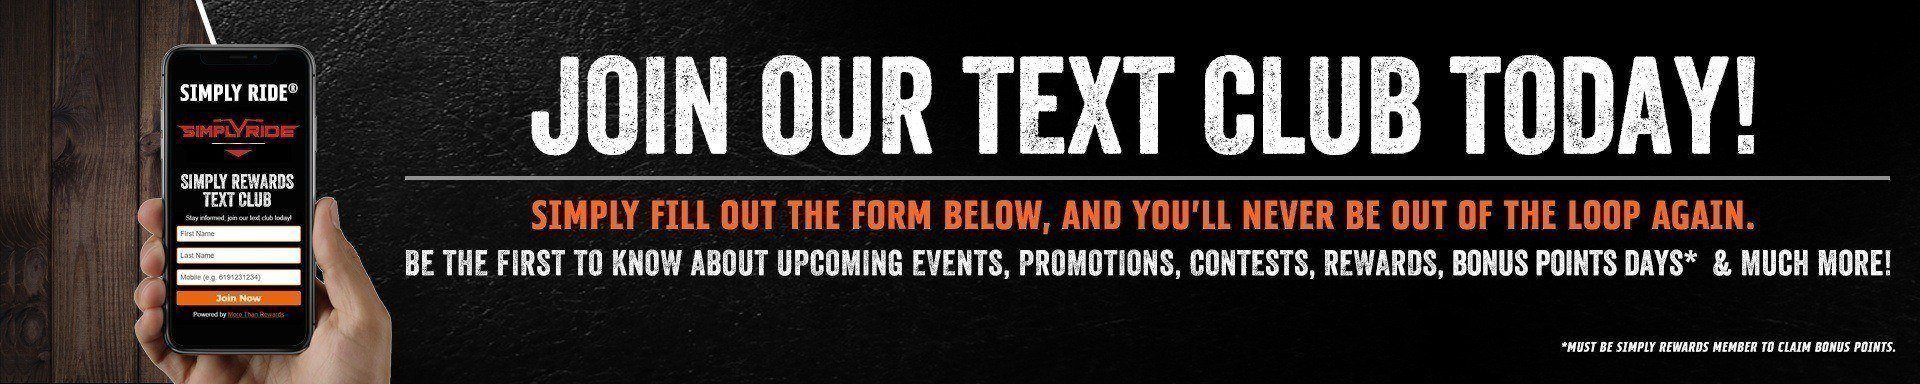 Join Our Text Club.